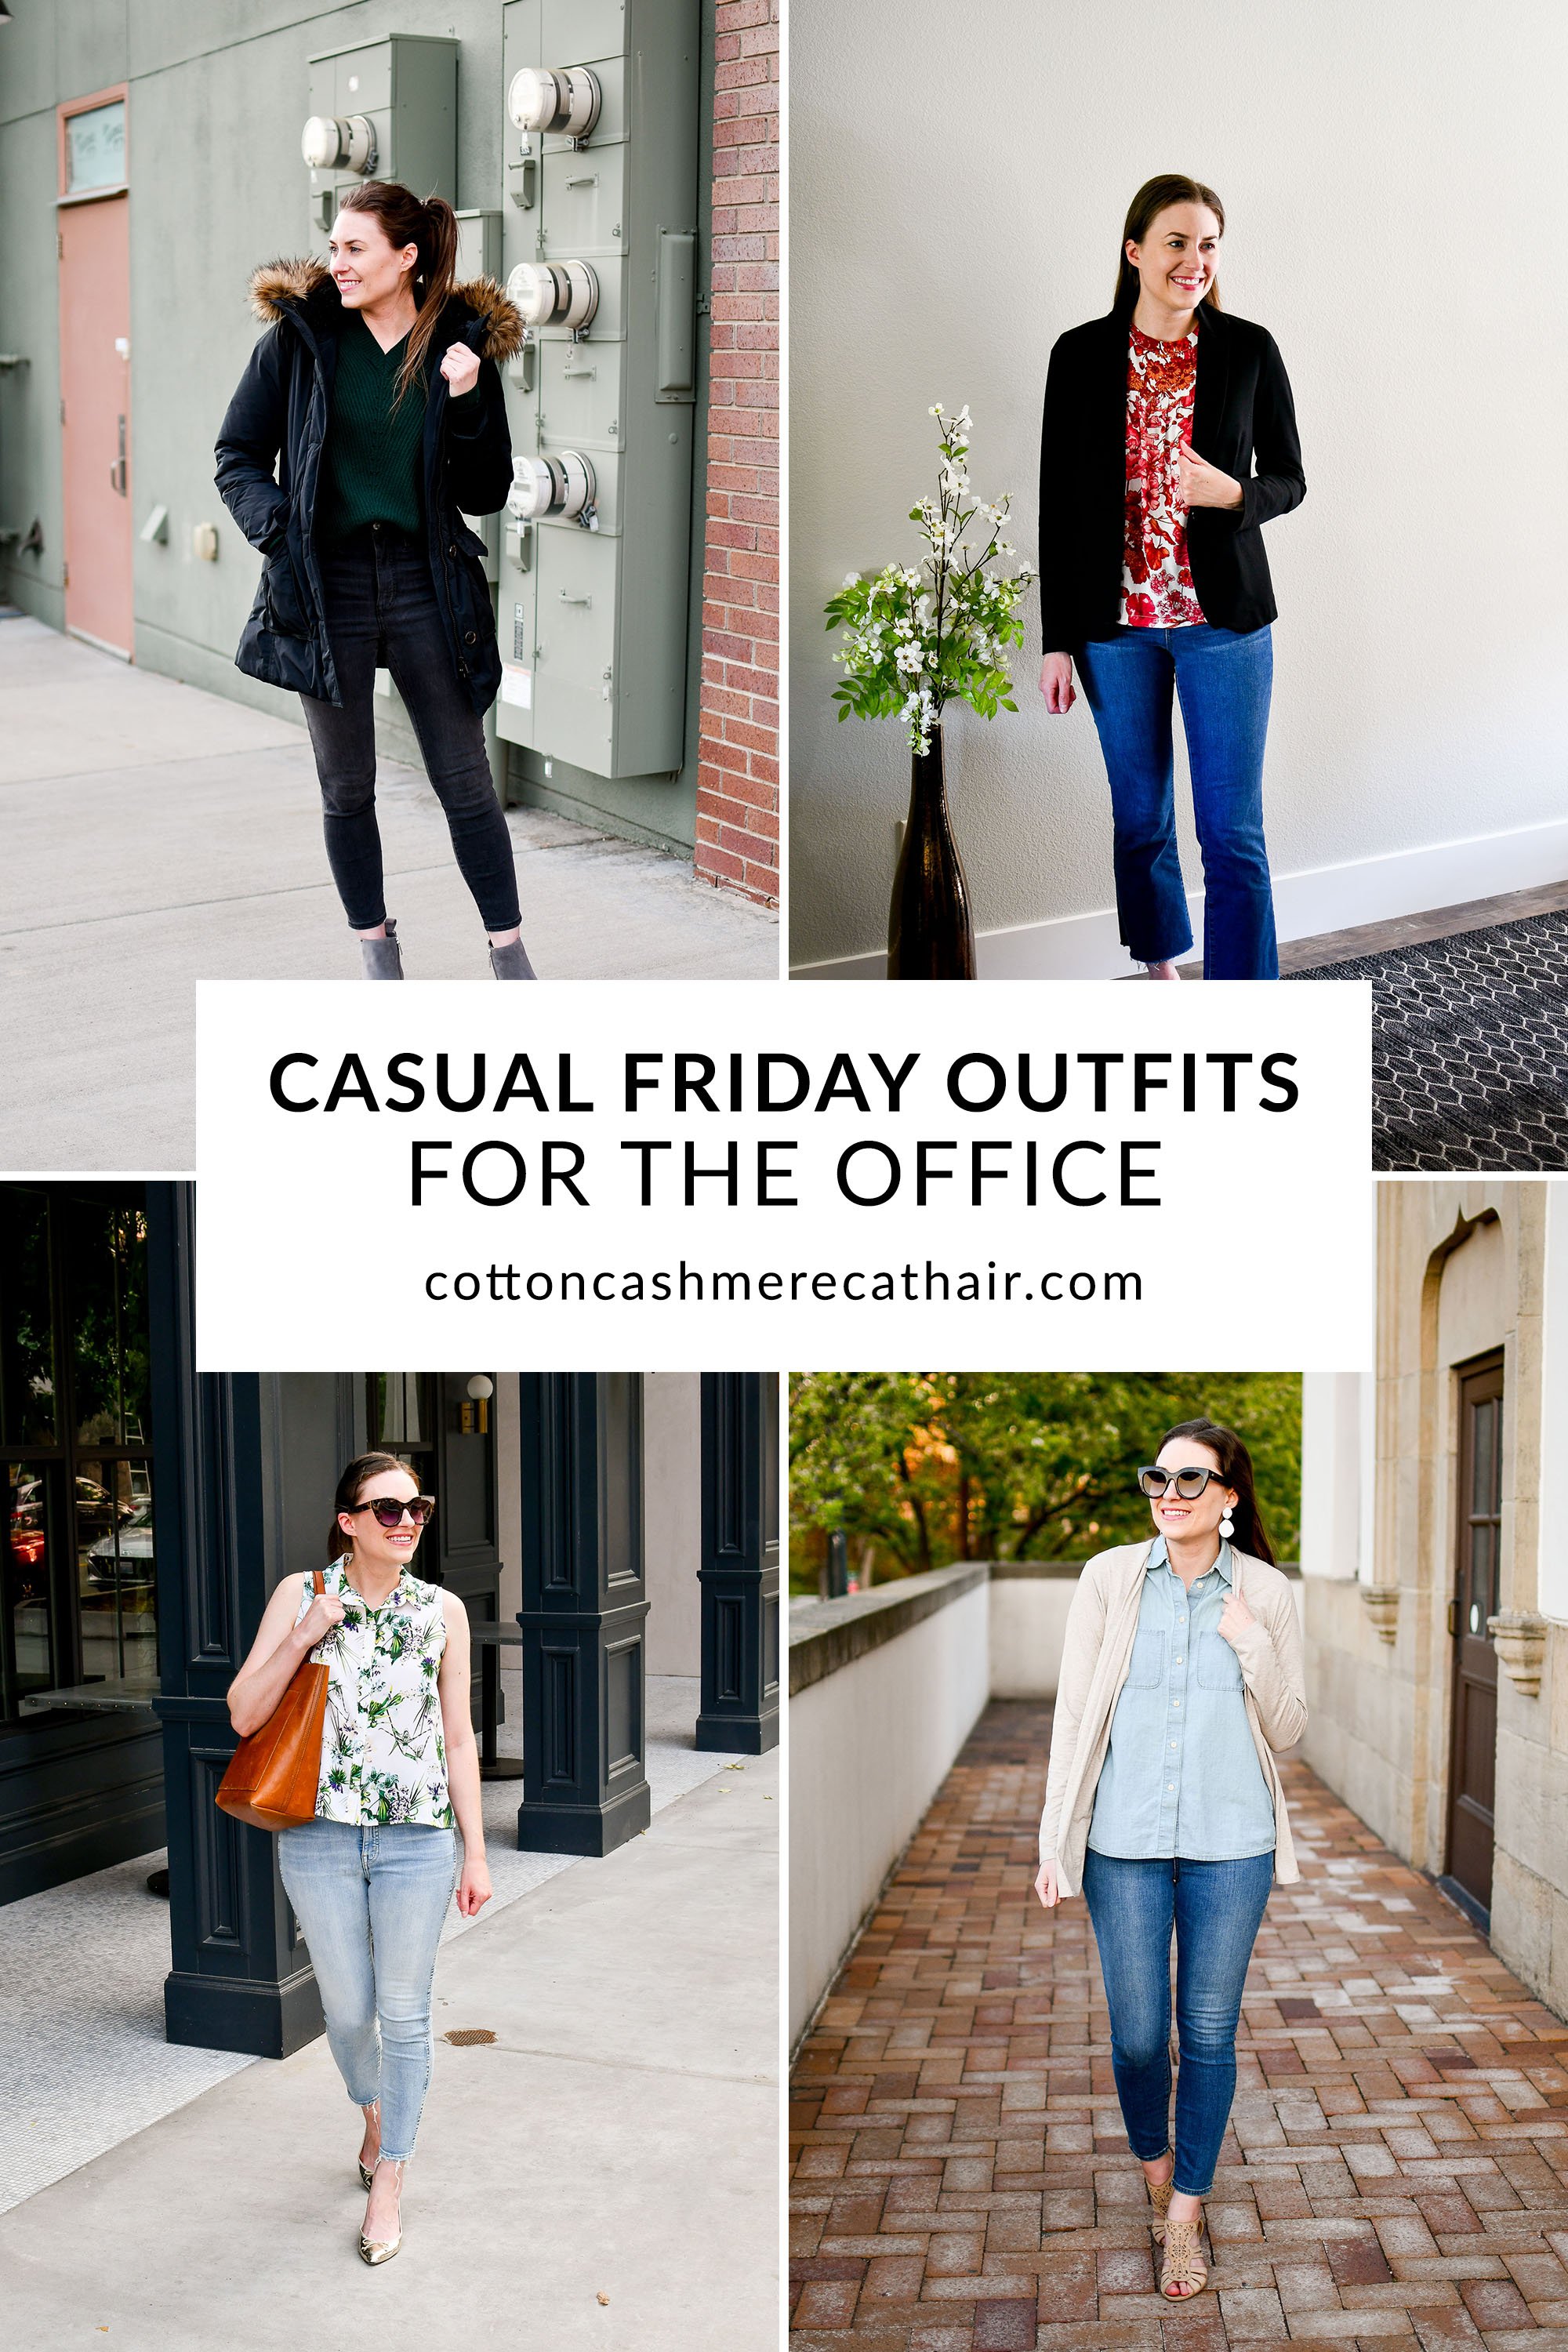 Travel Outfit Roundup: 7 Casual and Comfy Outfit Ideas - LIFE WITH